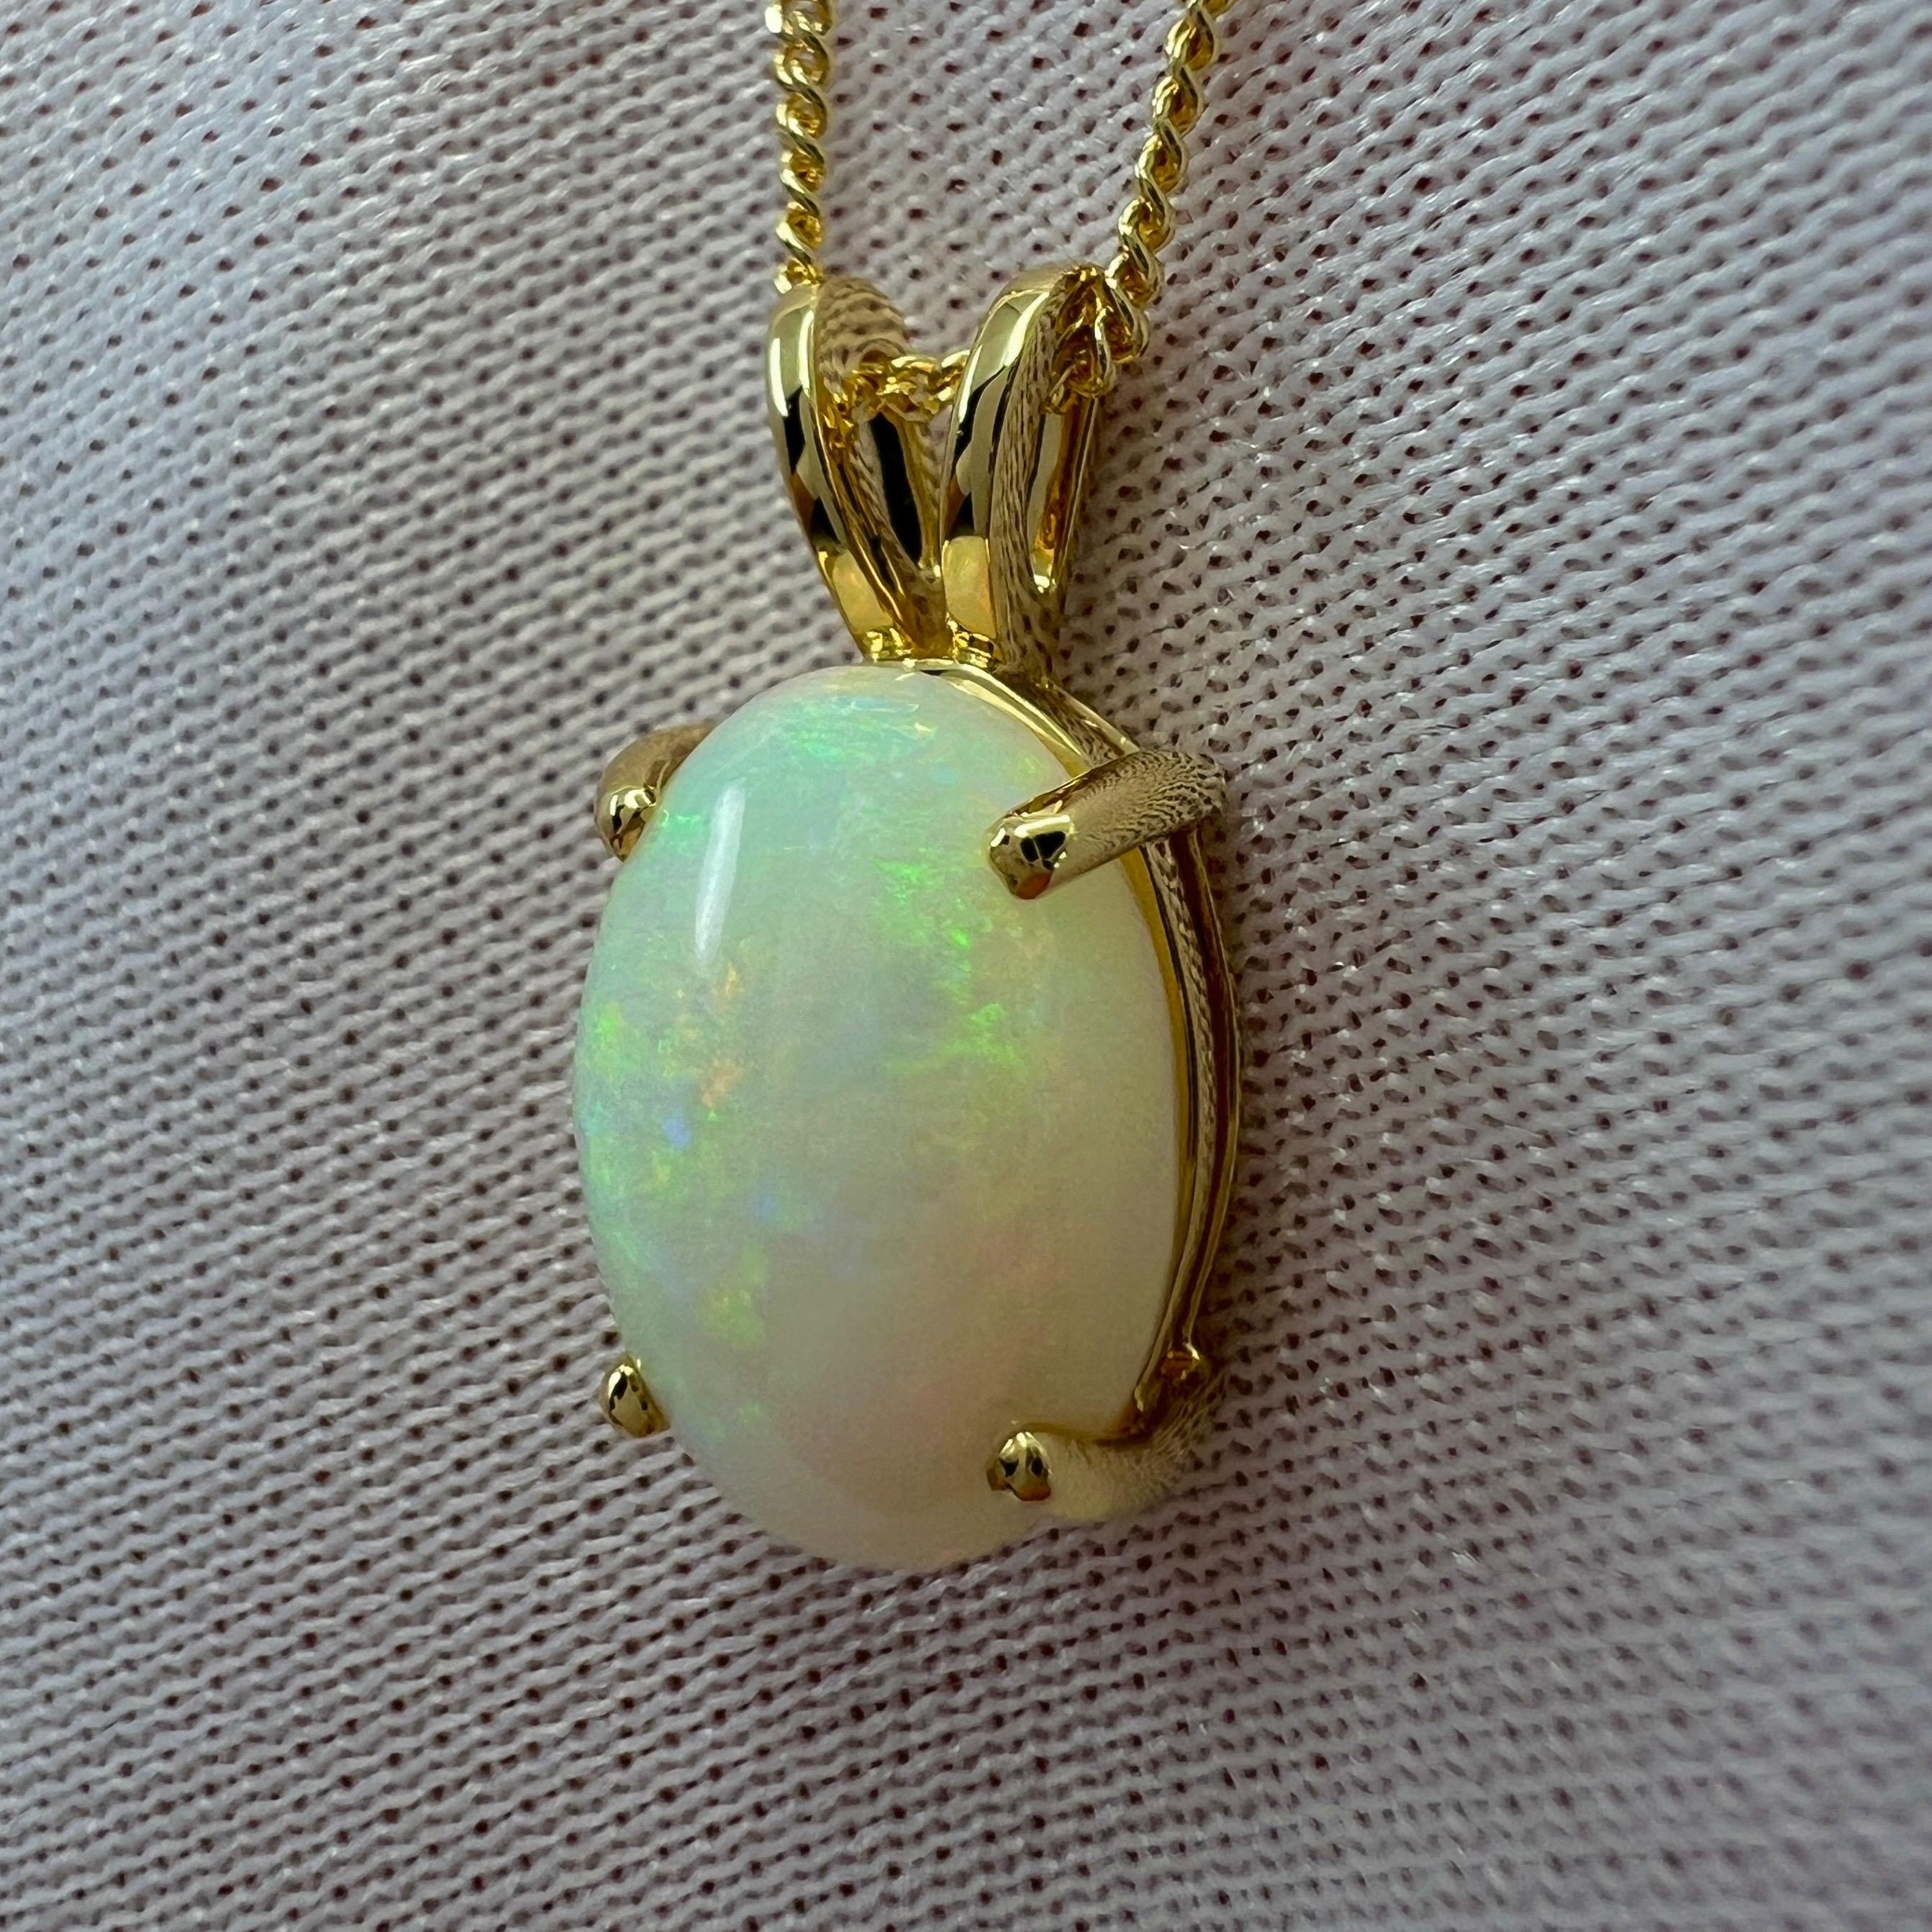 3ct Fine Australian White Opal Oval Cabochon 18k Yellow Gold Pendant Necklace For Sale 3